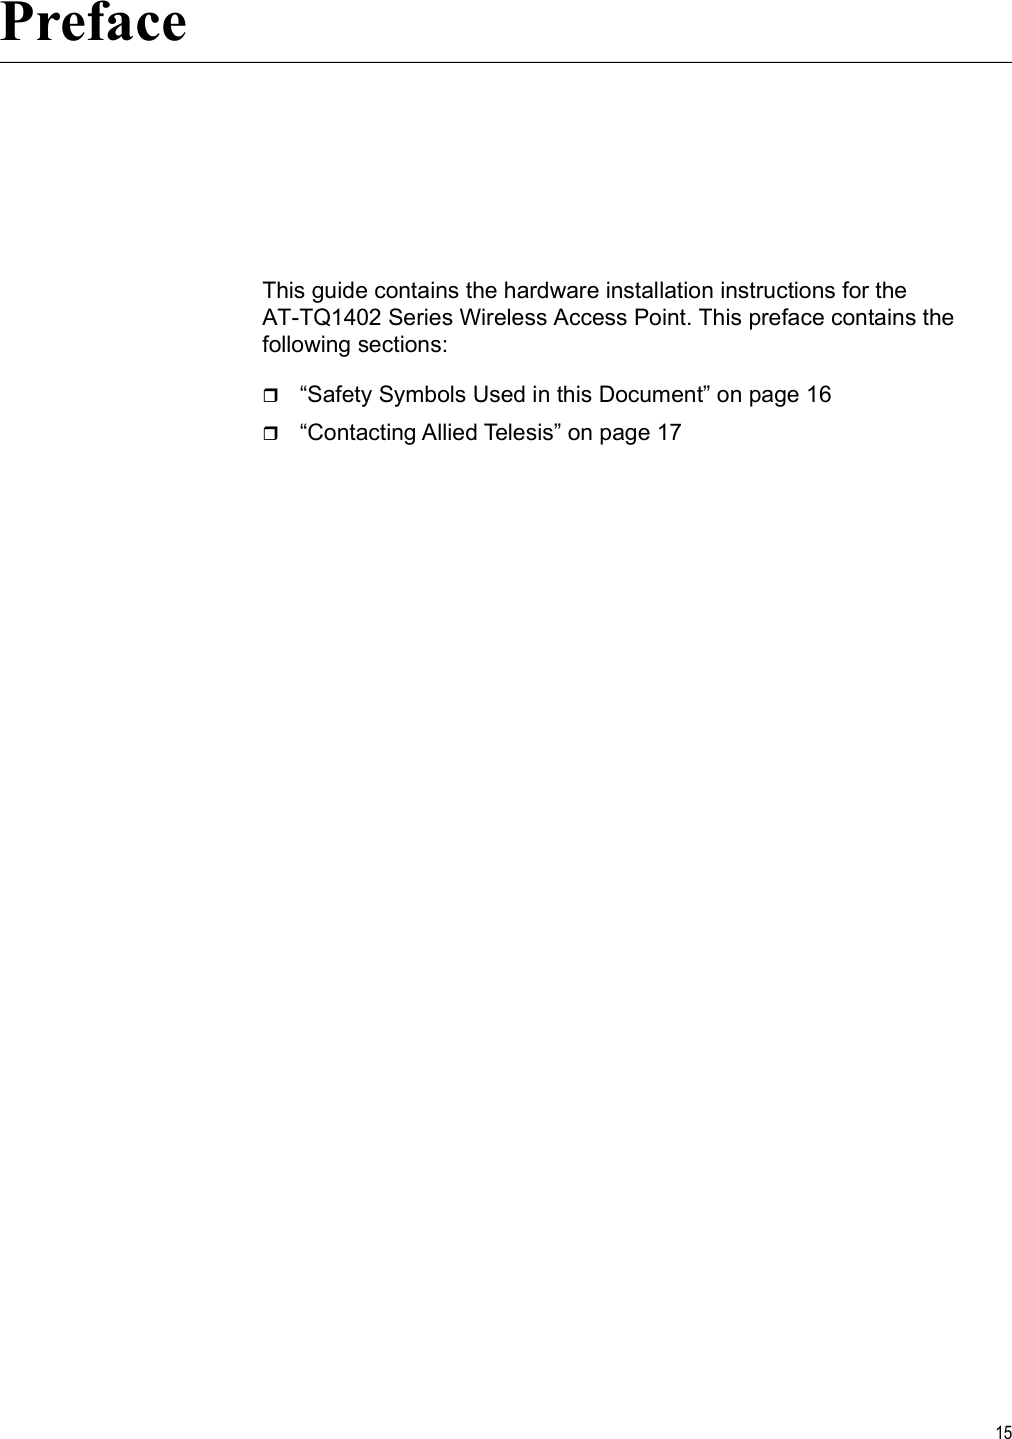 15PrefaceThis guide contains the hardware installation instructions for the AT-TQ1402 Series Wireless Access Point. This preface contains the following sections:“Safety Symbols Used in this Document” on page 16“Contacting Allied Telesis” on page 17